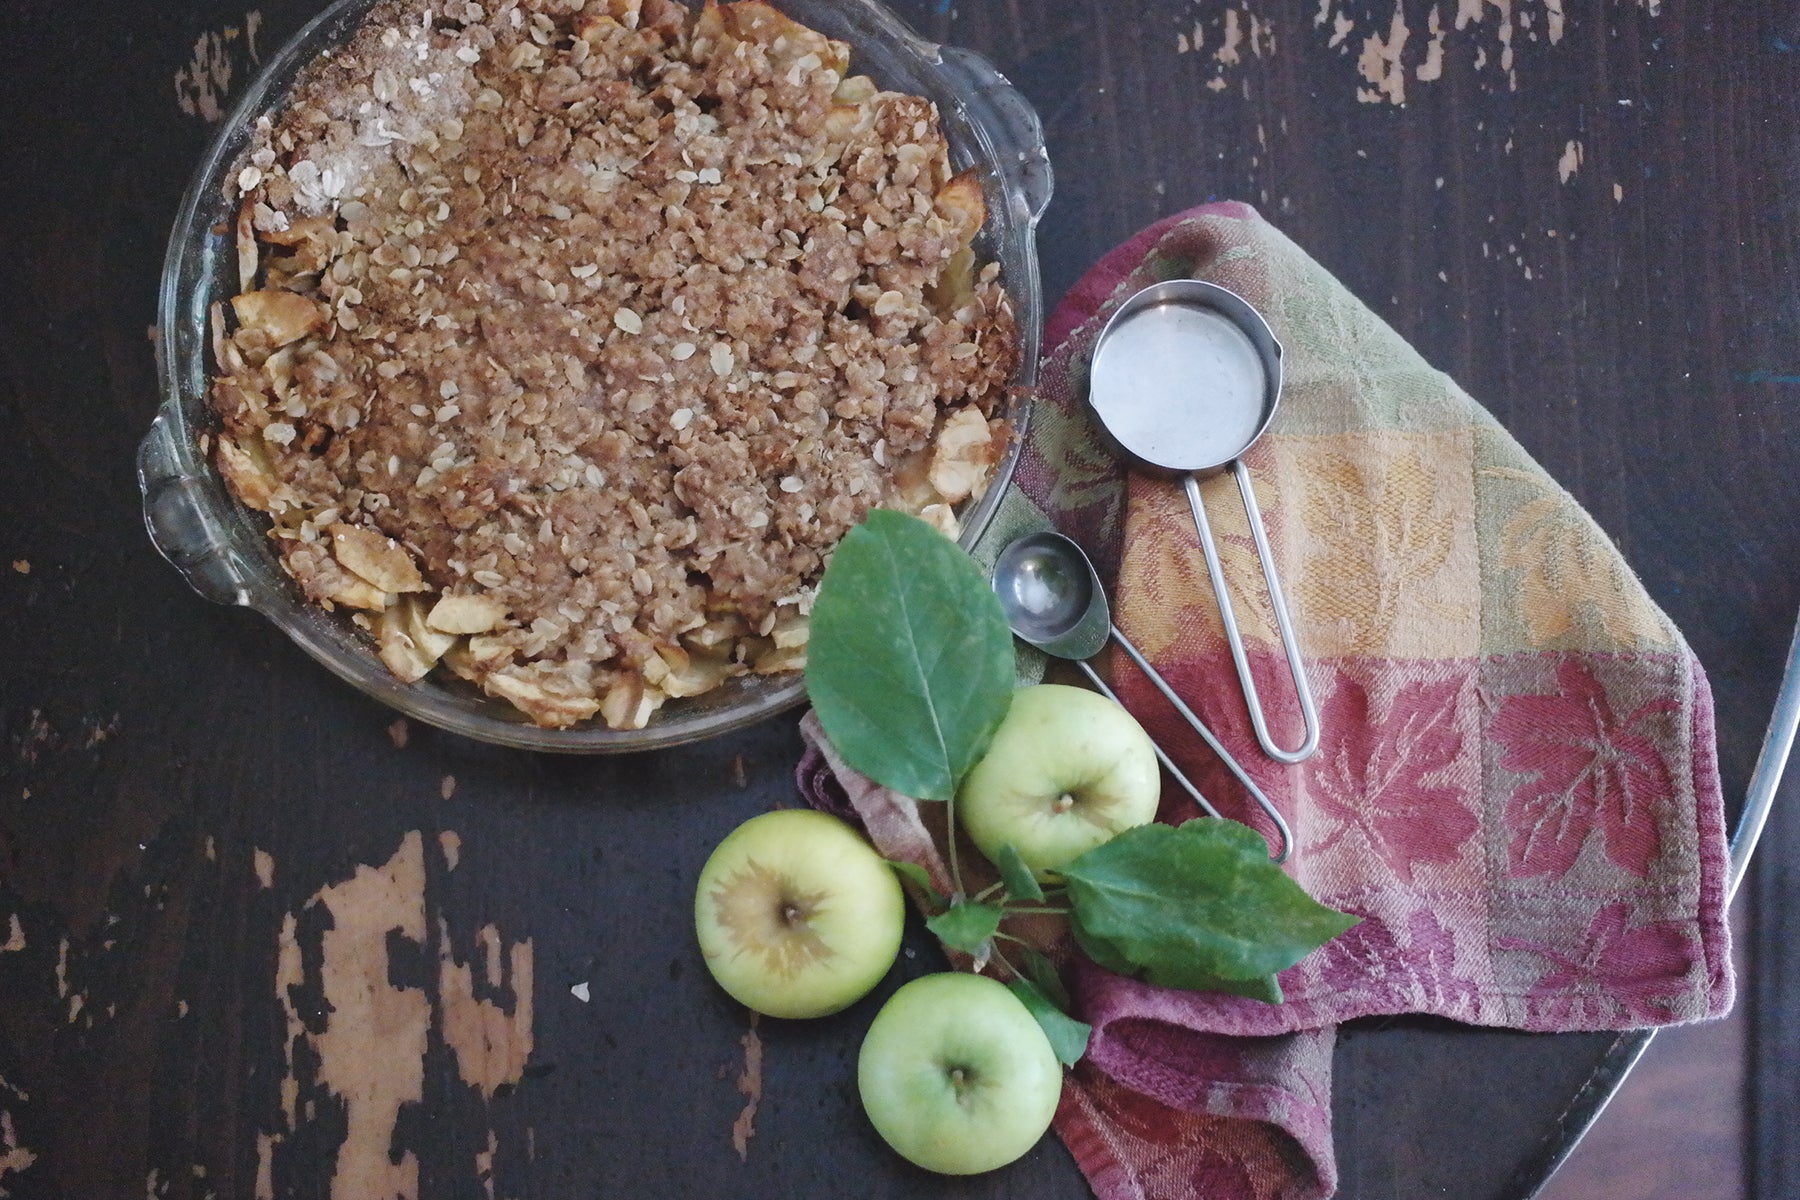 A homemade apple crumble next to some fresh apples, measuring utensils and a towel on a wooden table.